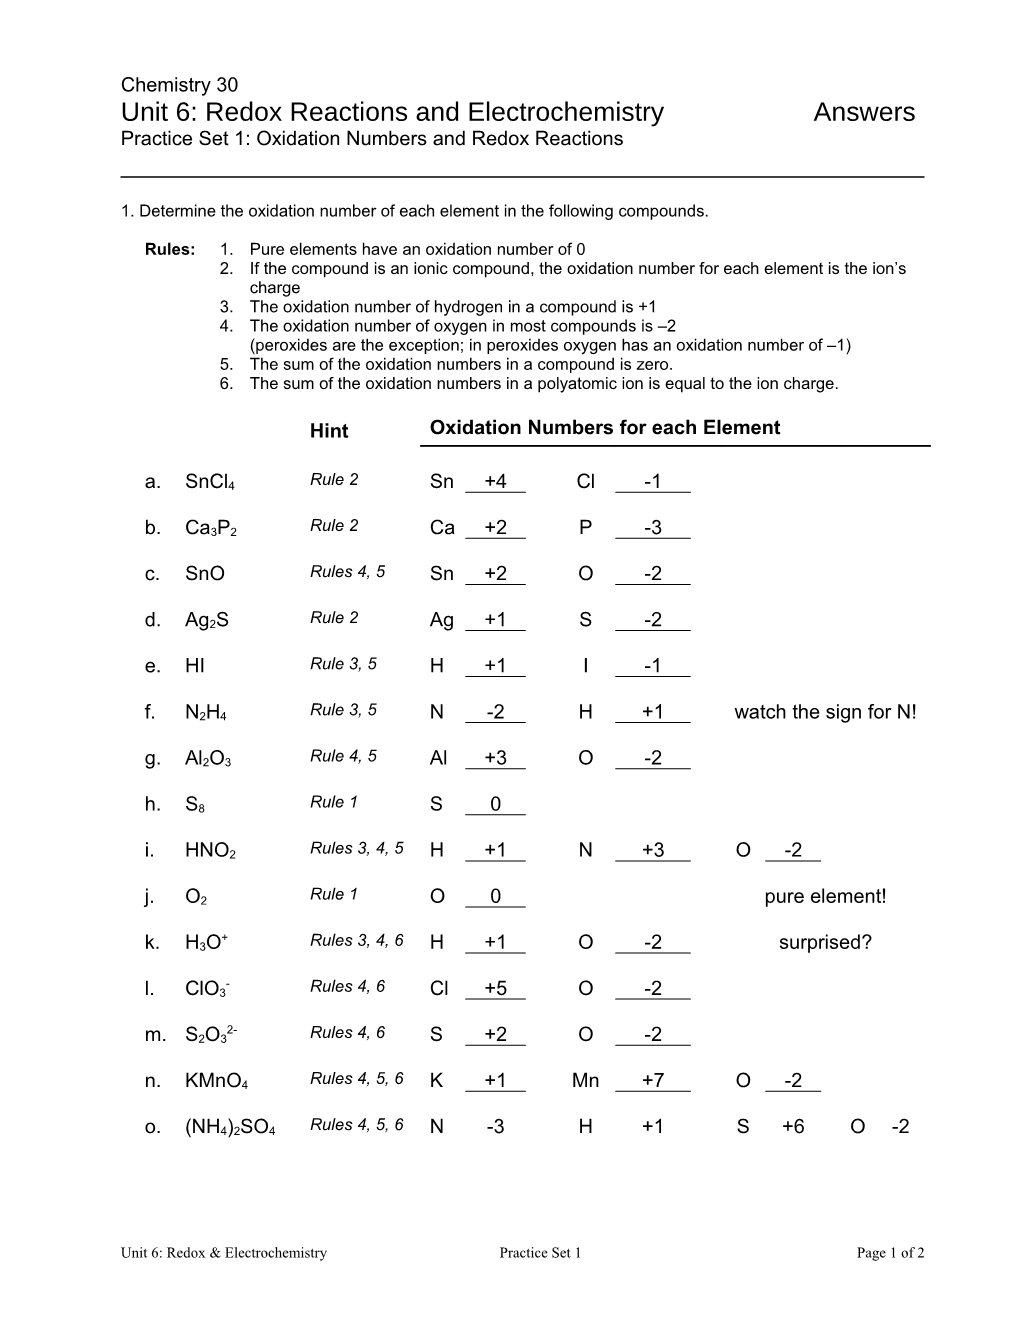 Unit 6: Redox Reactions and Electrochemistry Answers